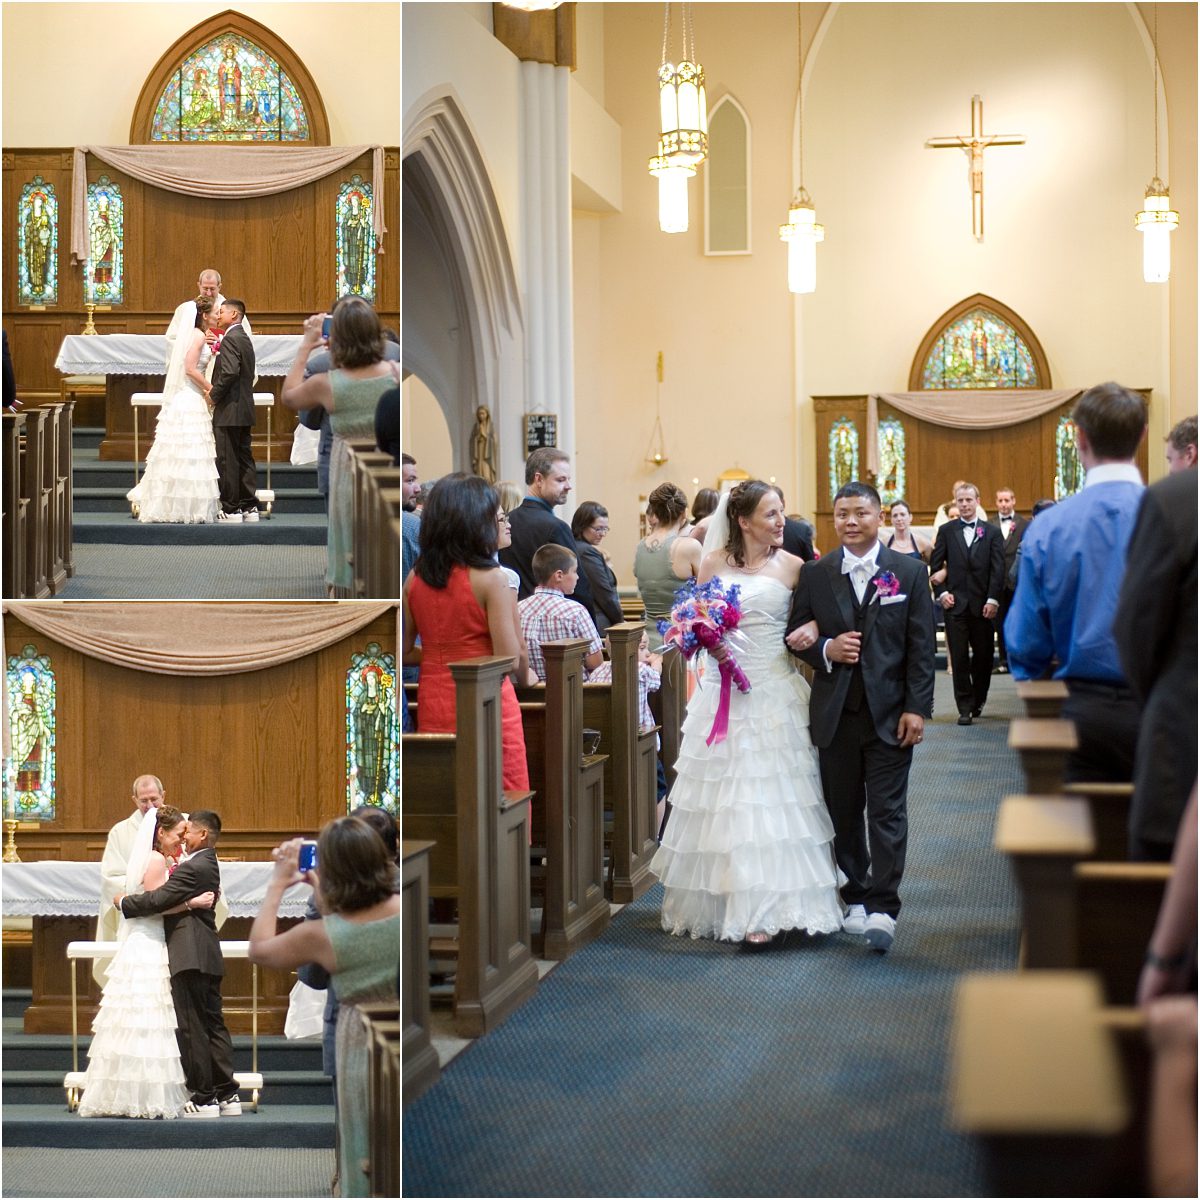 recessional, first kiss, bride and groom walking down the aisle,catholic church, ceremony, colorado wedding photographer